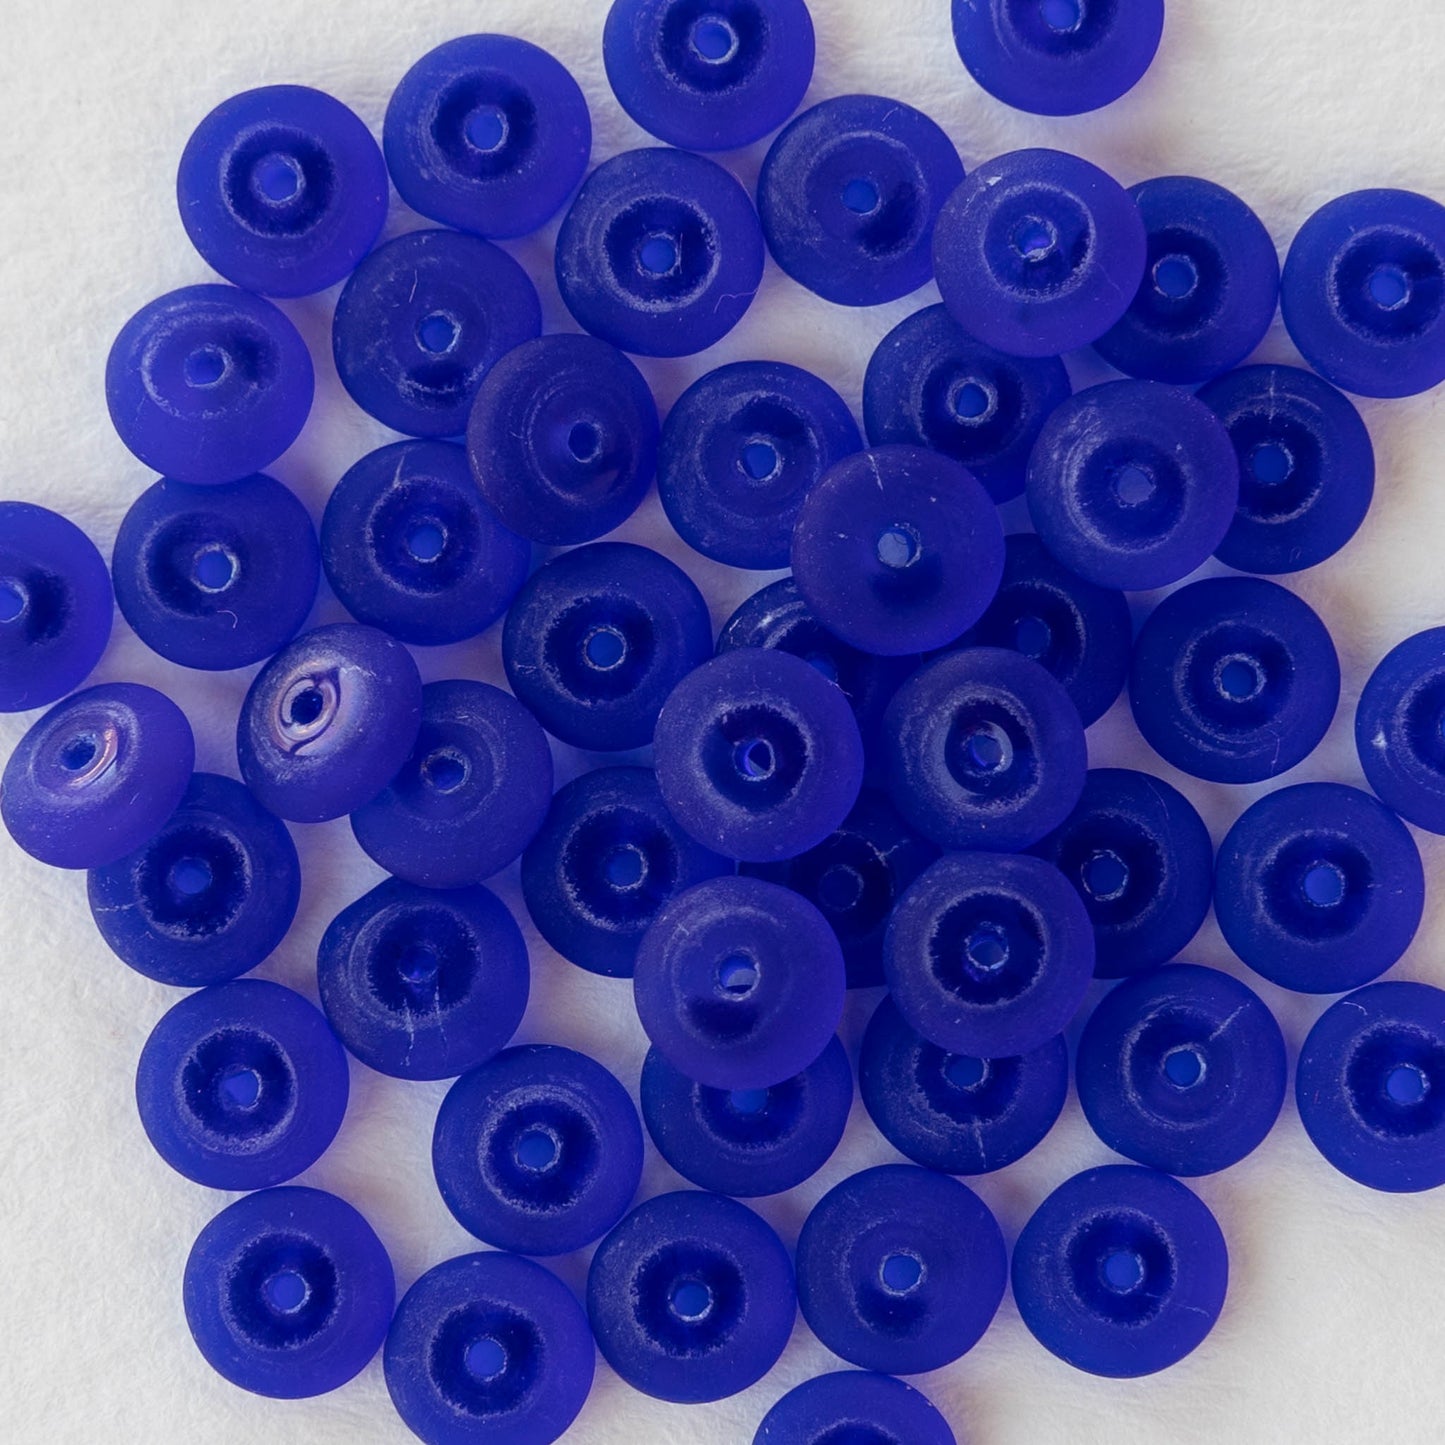 Load image into Gallery viewer, 6mm Frosted Glass Rondelle - Matte Cobalt Blue - 100 Beads
